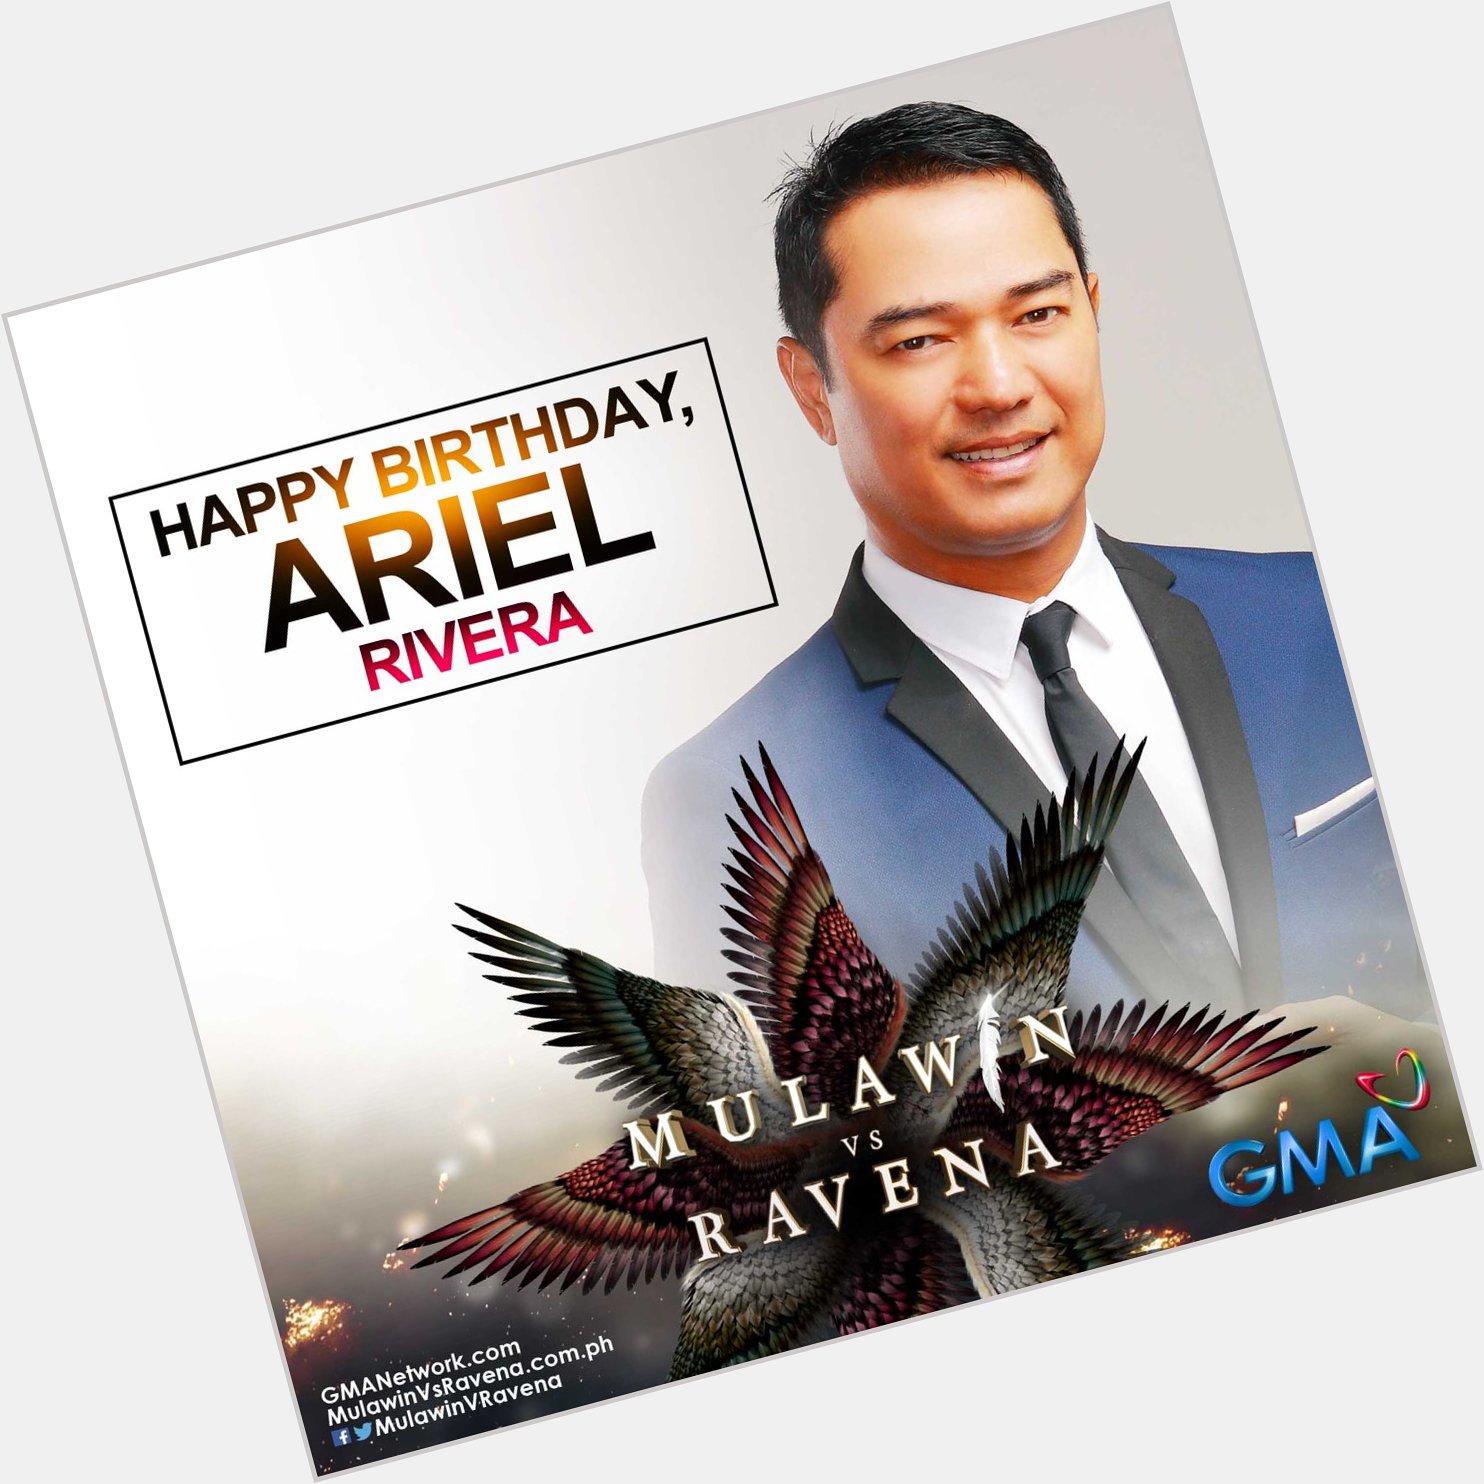 Happy birthday, Ariel Rivera! May your day be filled with blessings! 